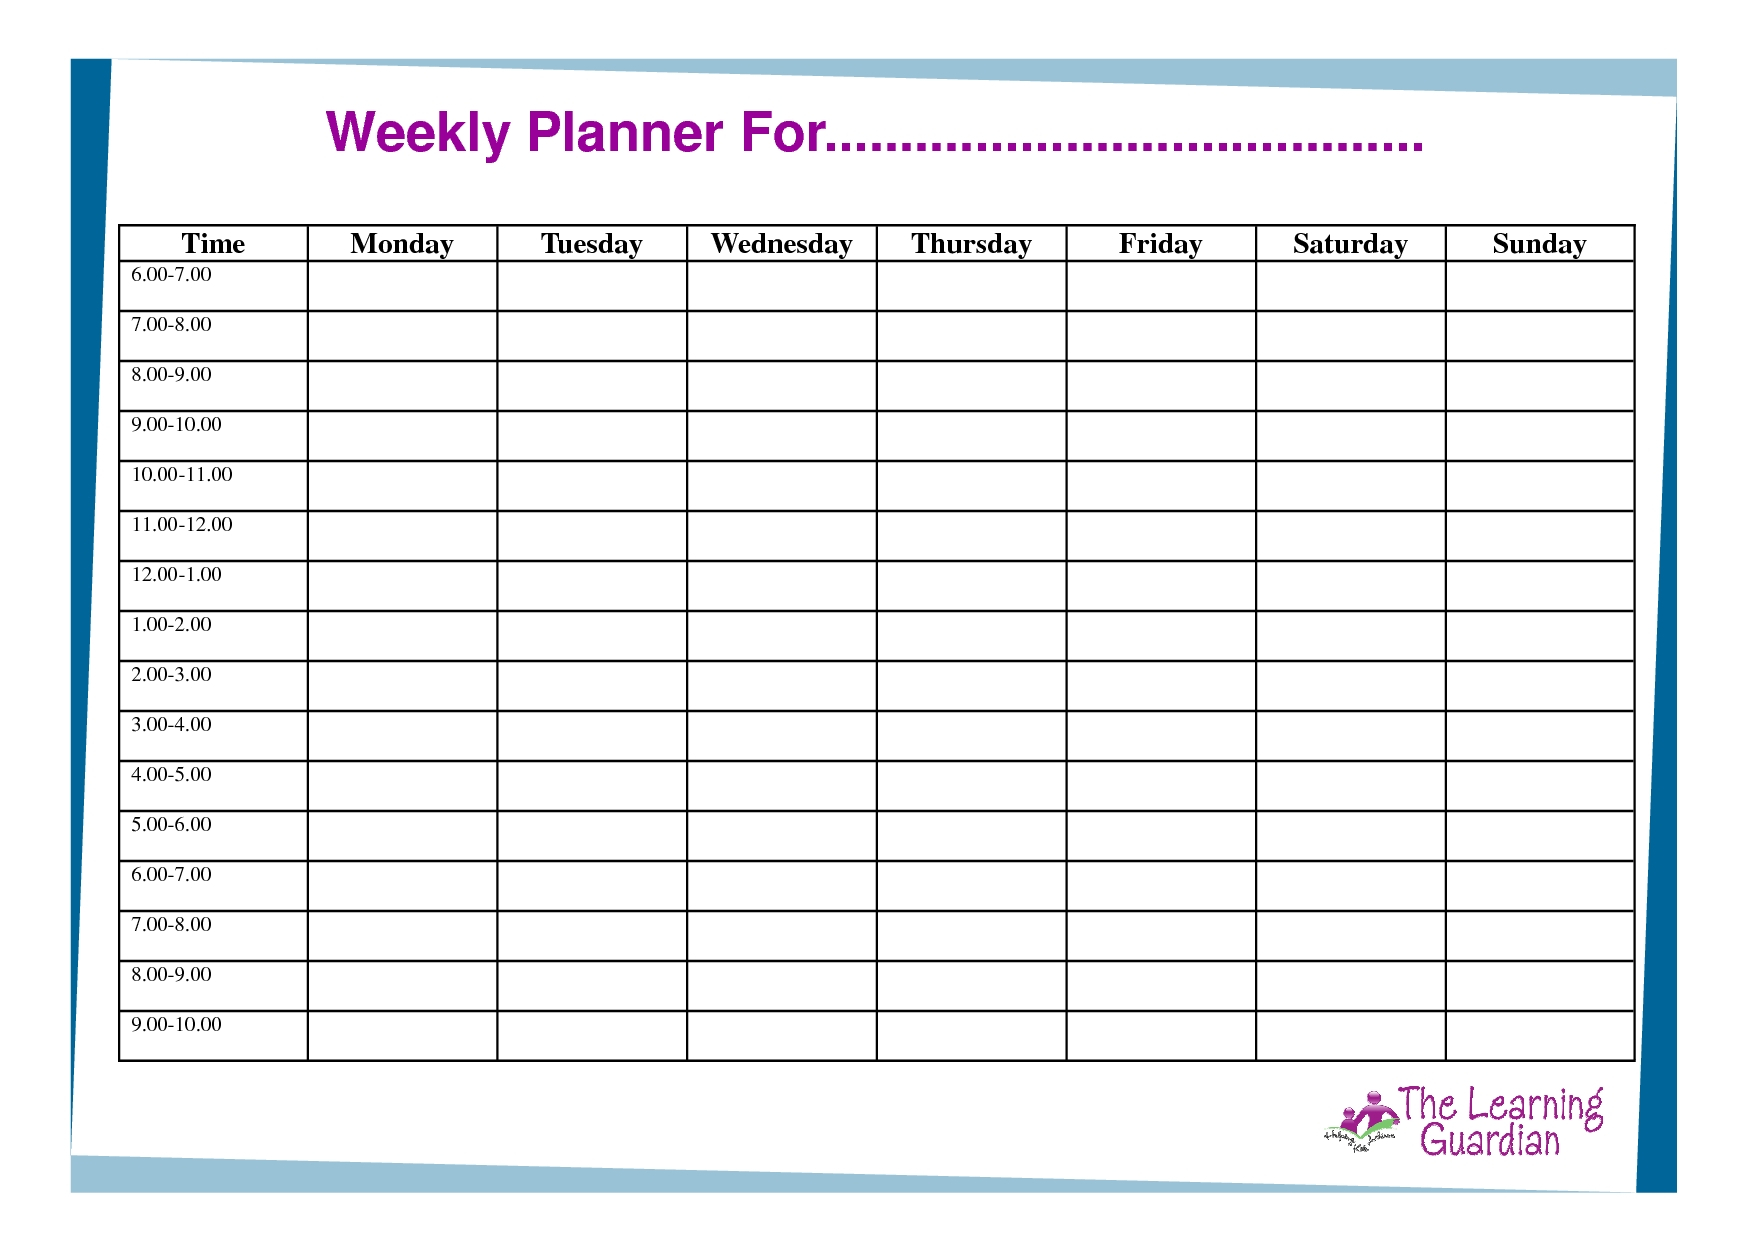 Online Daily Time Slot Planner  Template Calendar Design pertaining to Appointment Time Slots Template